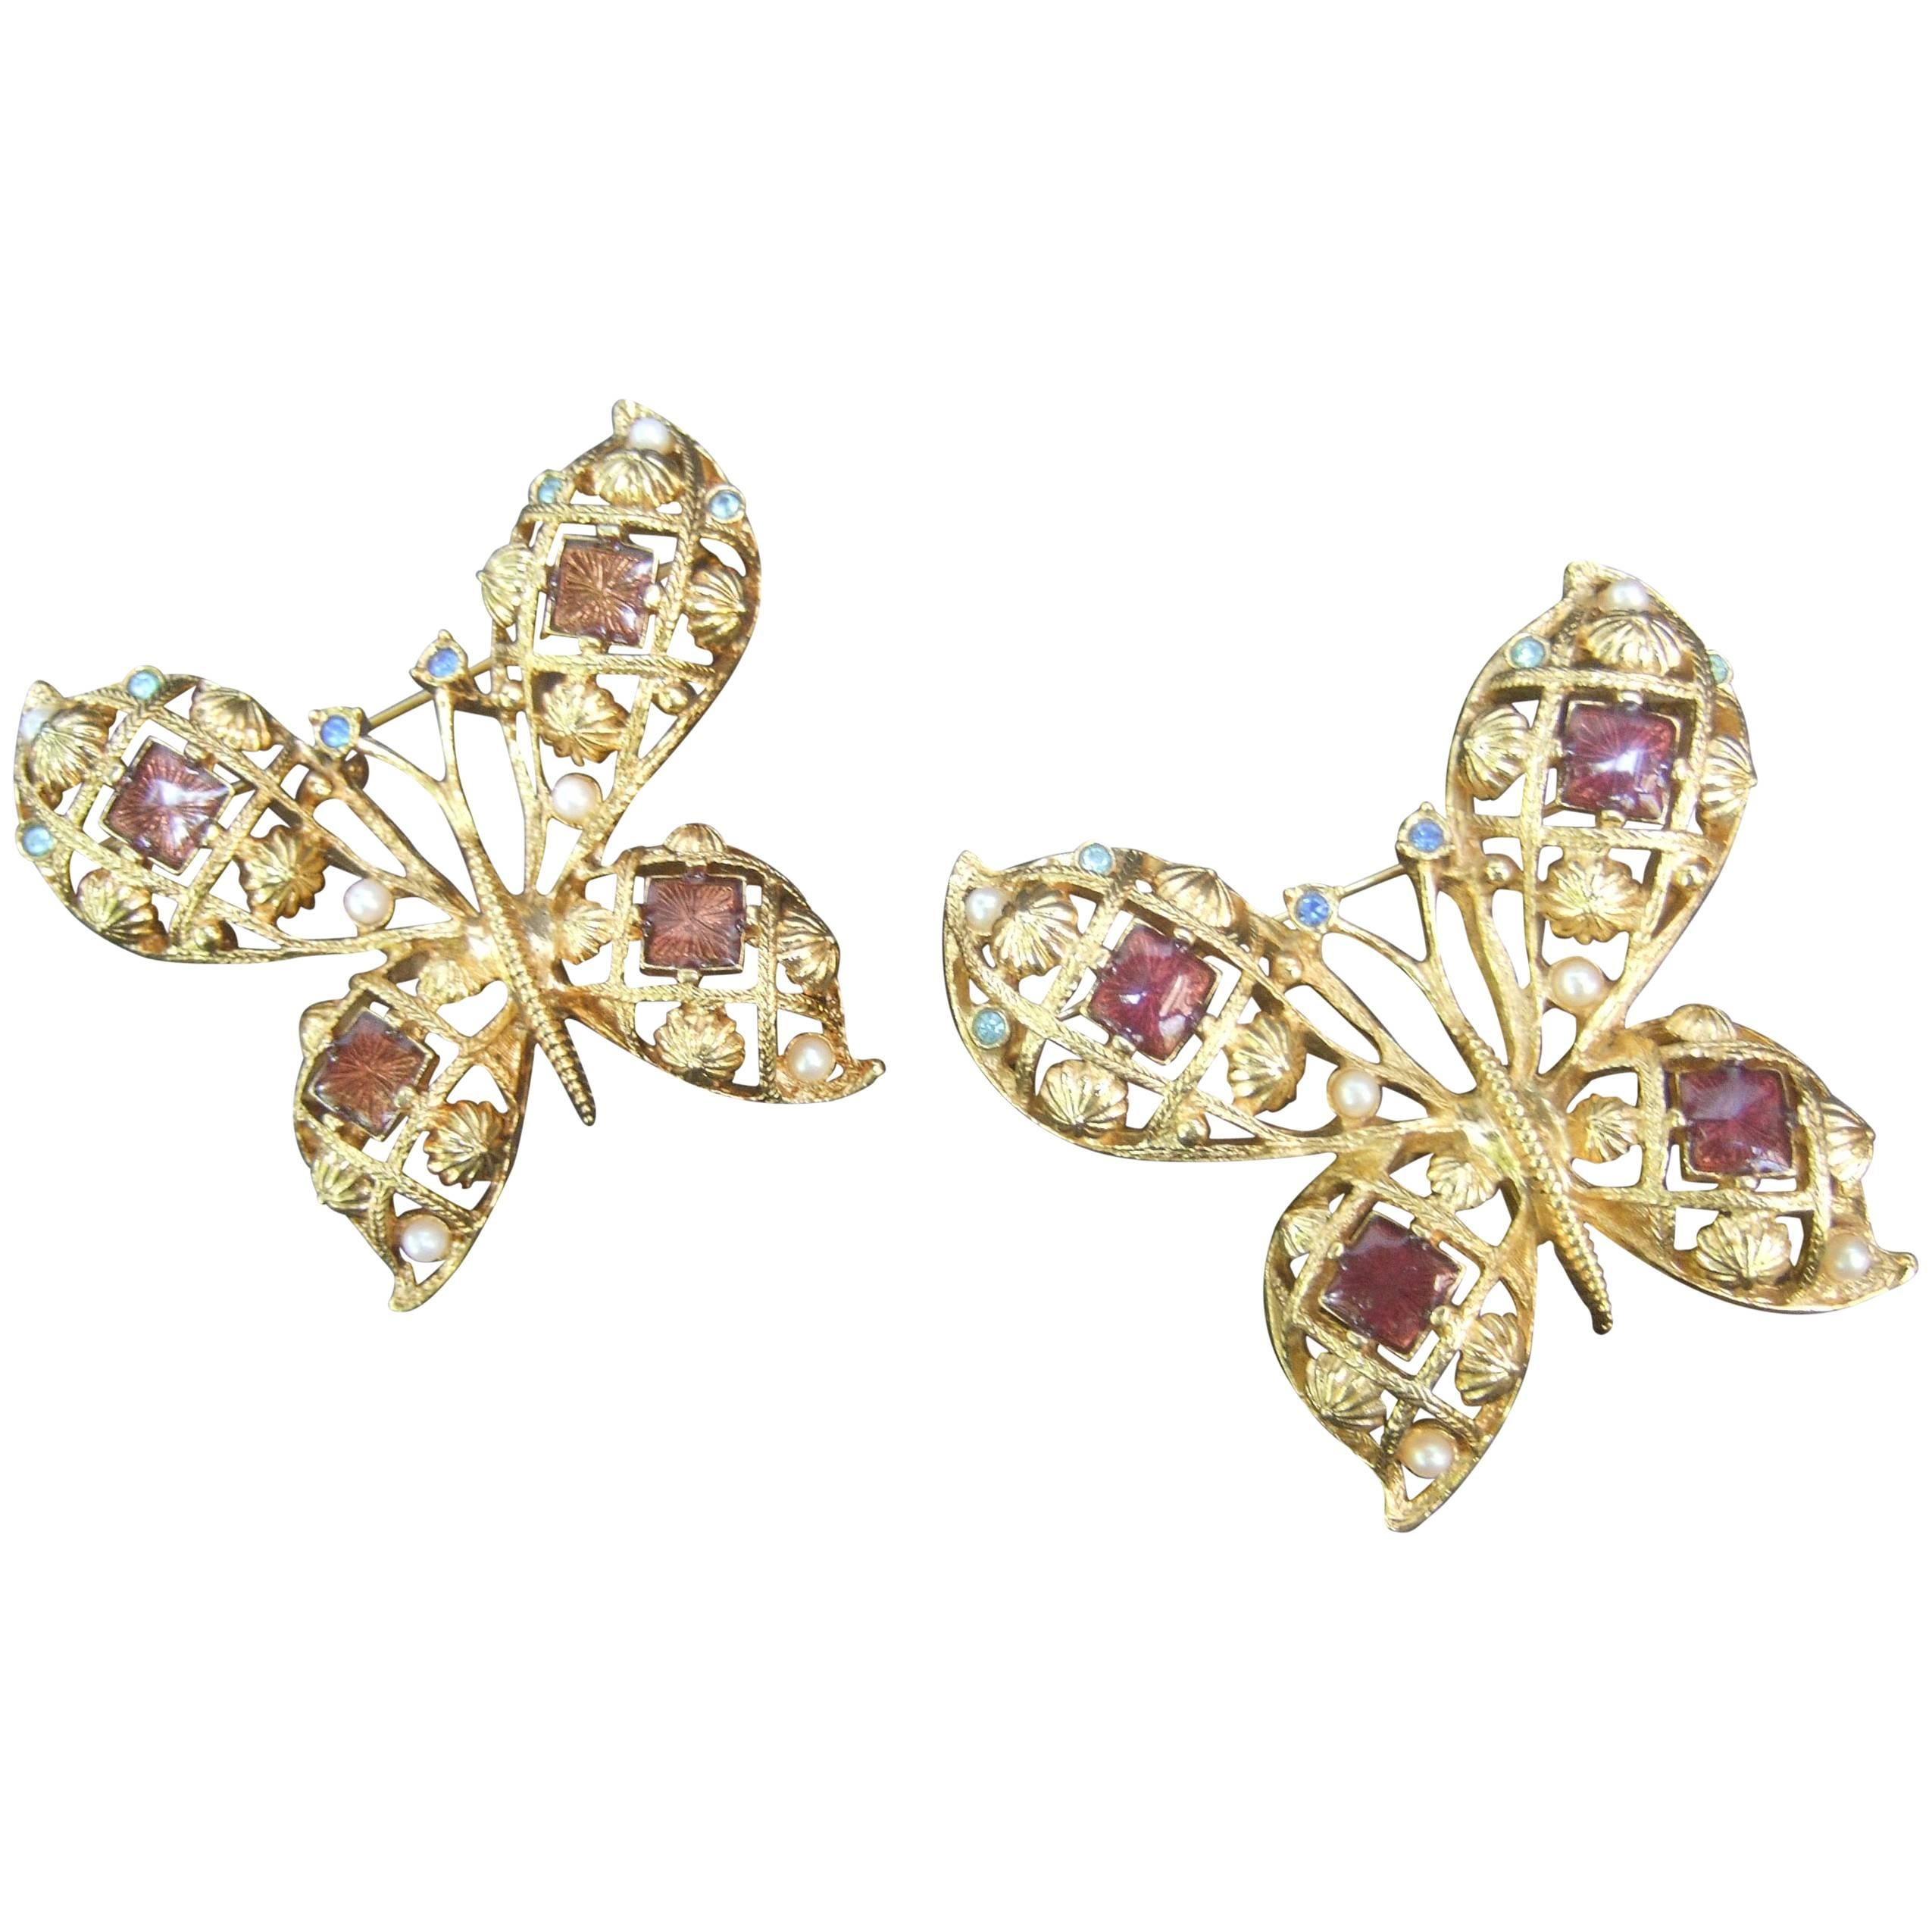 Pair of Jeweled Enamel Gilt Metal Butterfly Brooches circa 1980s For Sale